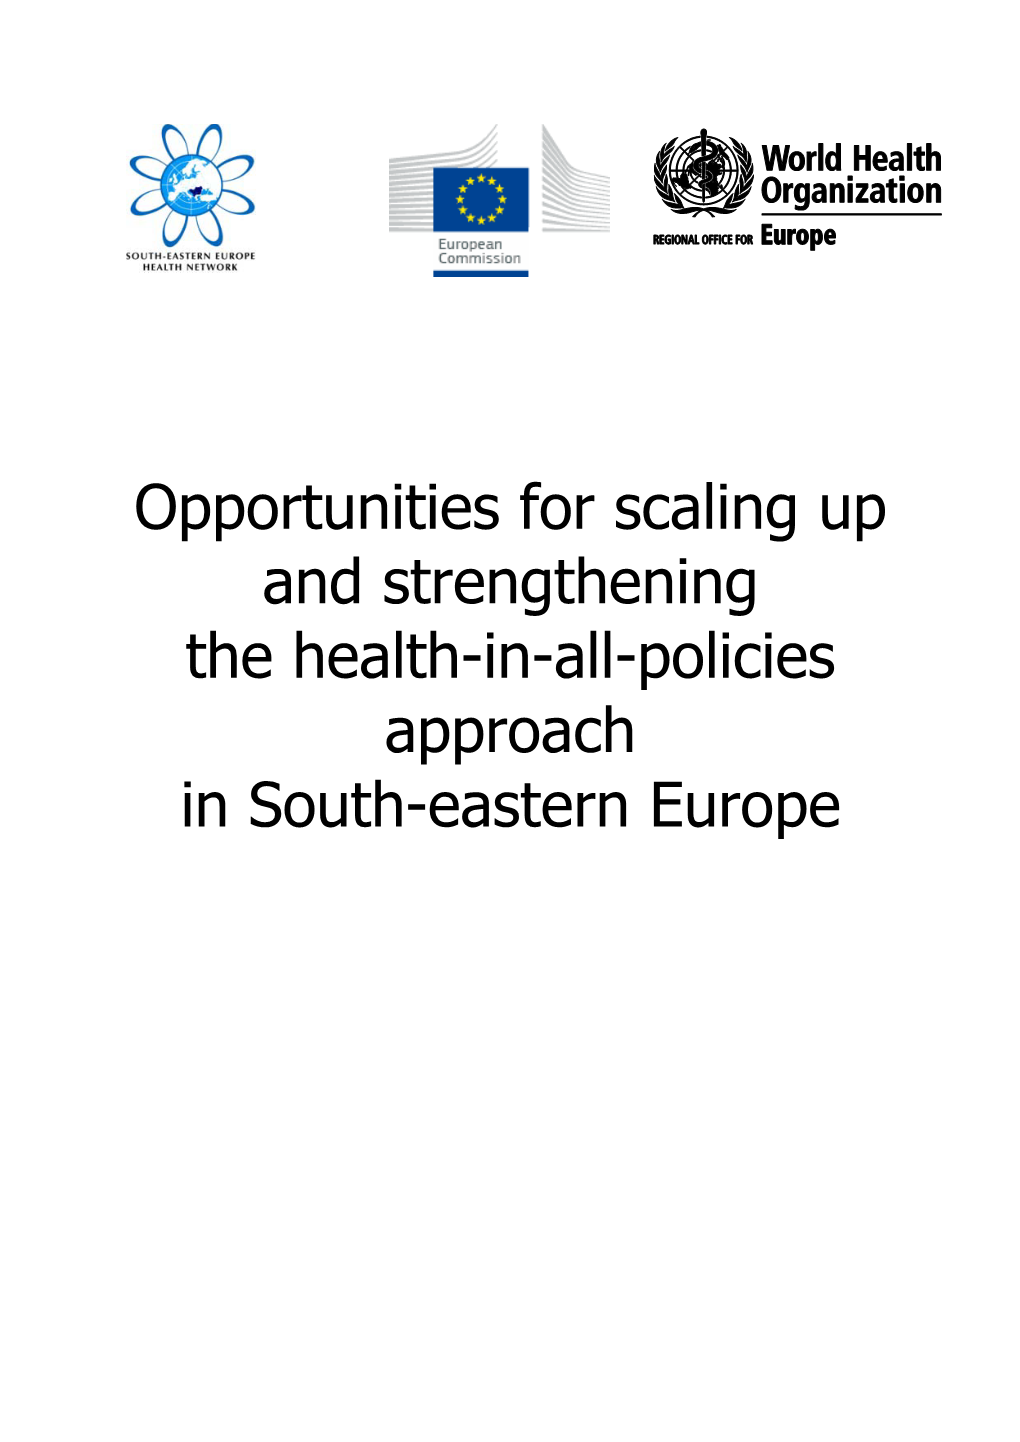 Opportunities for Scaling up and Strengthening the Health-In-All-Policies Approach in South-Eastern Europe